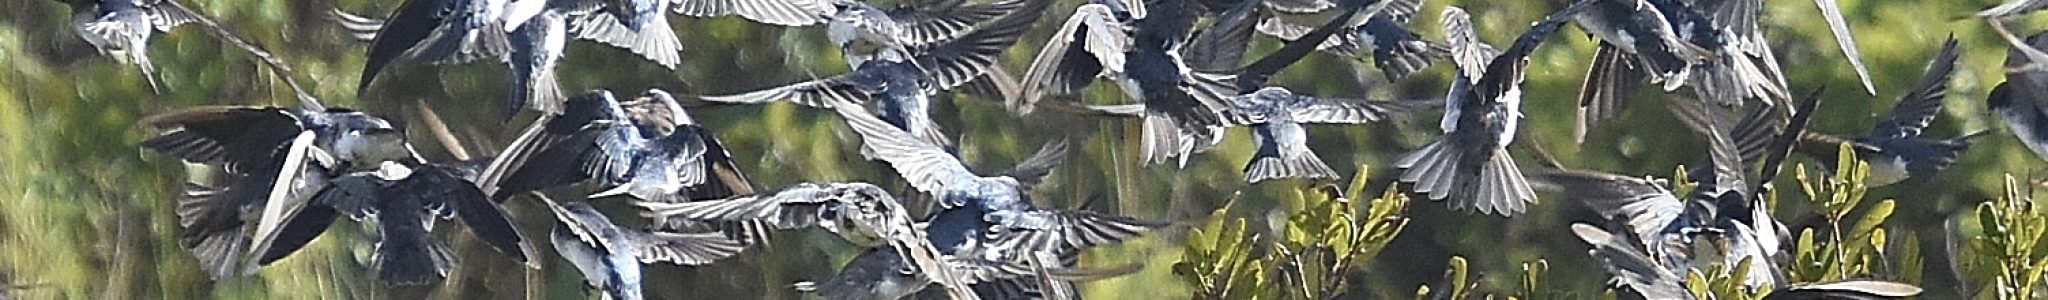 Tree Swallows feasting on bayberries